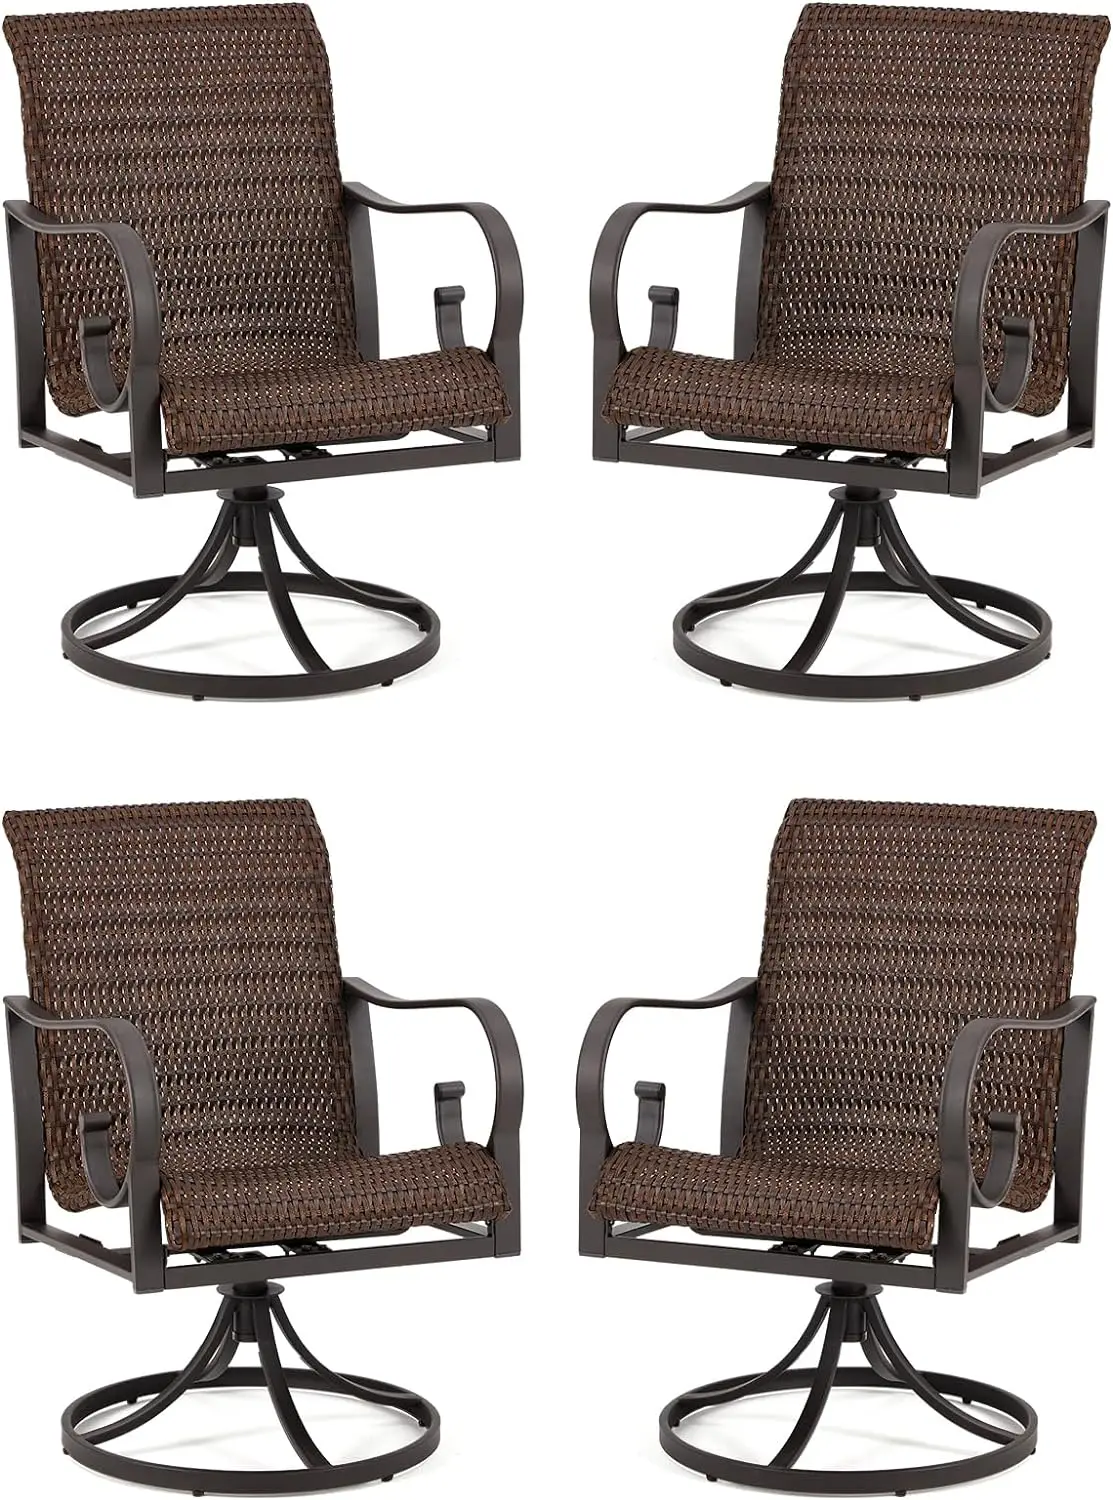 

4 PCS Patio Wicker Swivel Chair Set of 2, Heavy Duty Outdoor Dining Chair with 23.5'' High Back, Extra-Large Water-Fall Seat